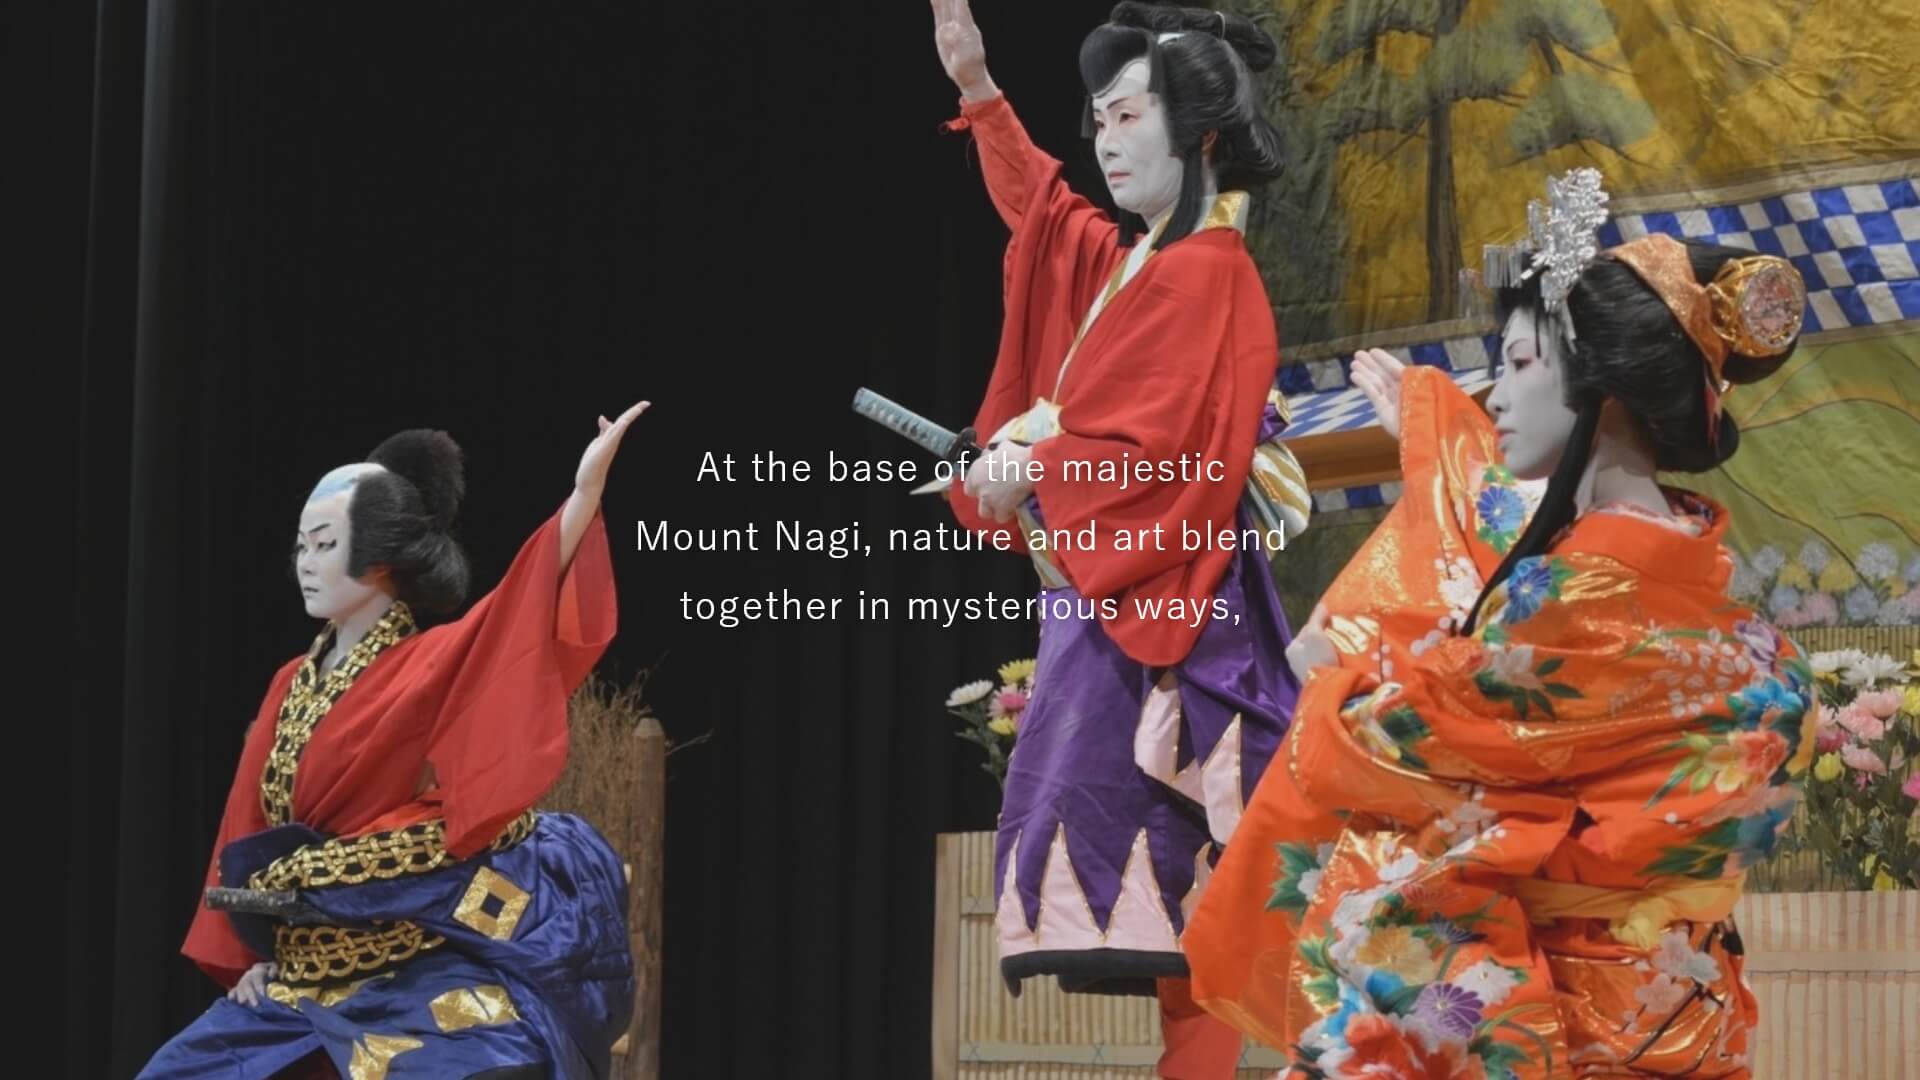 At the base of the majestic Mount Nagi, nature and art blend together in mysterious ways,